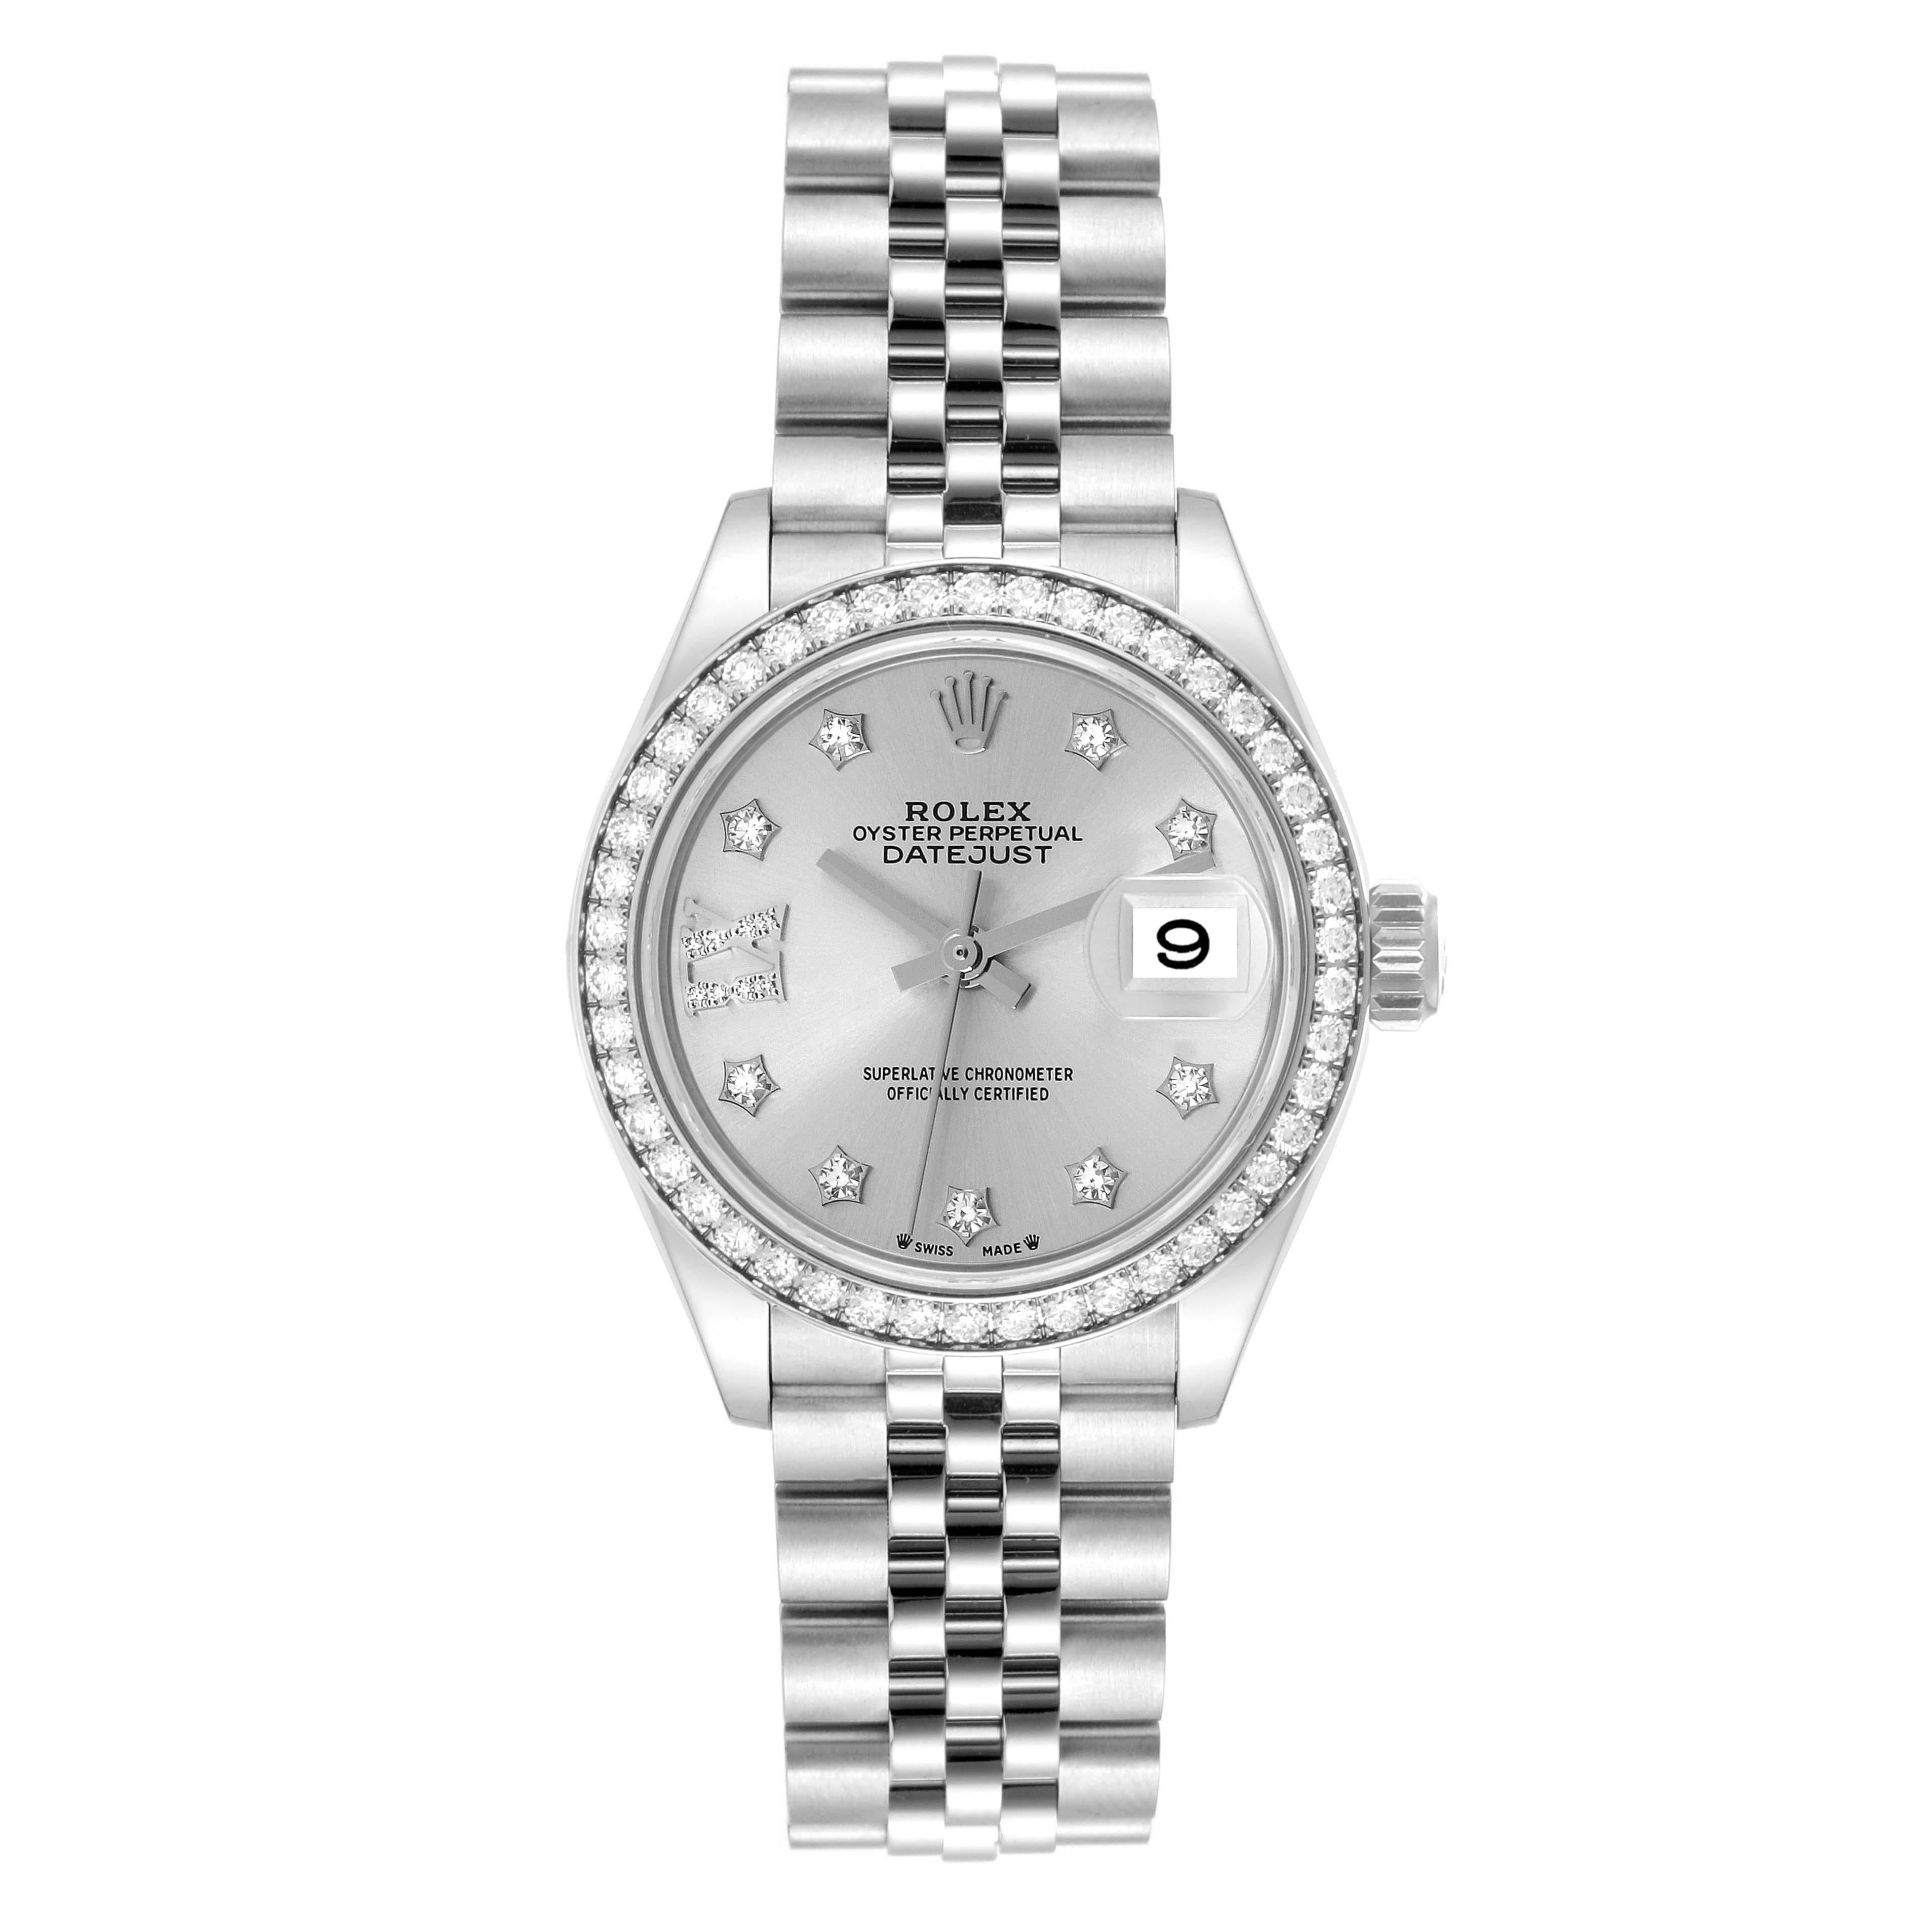 Rolex Datejust Steel White Gold Silver Dial Diamond Ladies Watch 279384. Officially certified chronometer automatic self-winding movement. Stainless steel oyster case 28.0 mm in diameter. Rolex logo on a crown. Original Rolex factory diamond bezel.